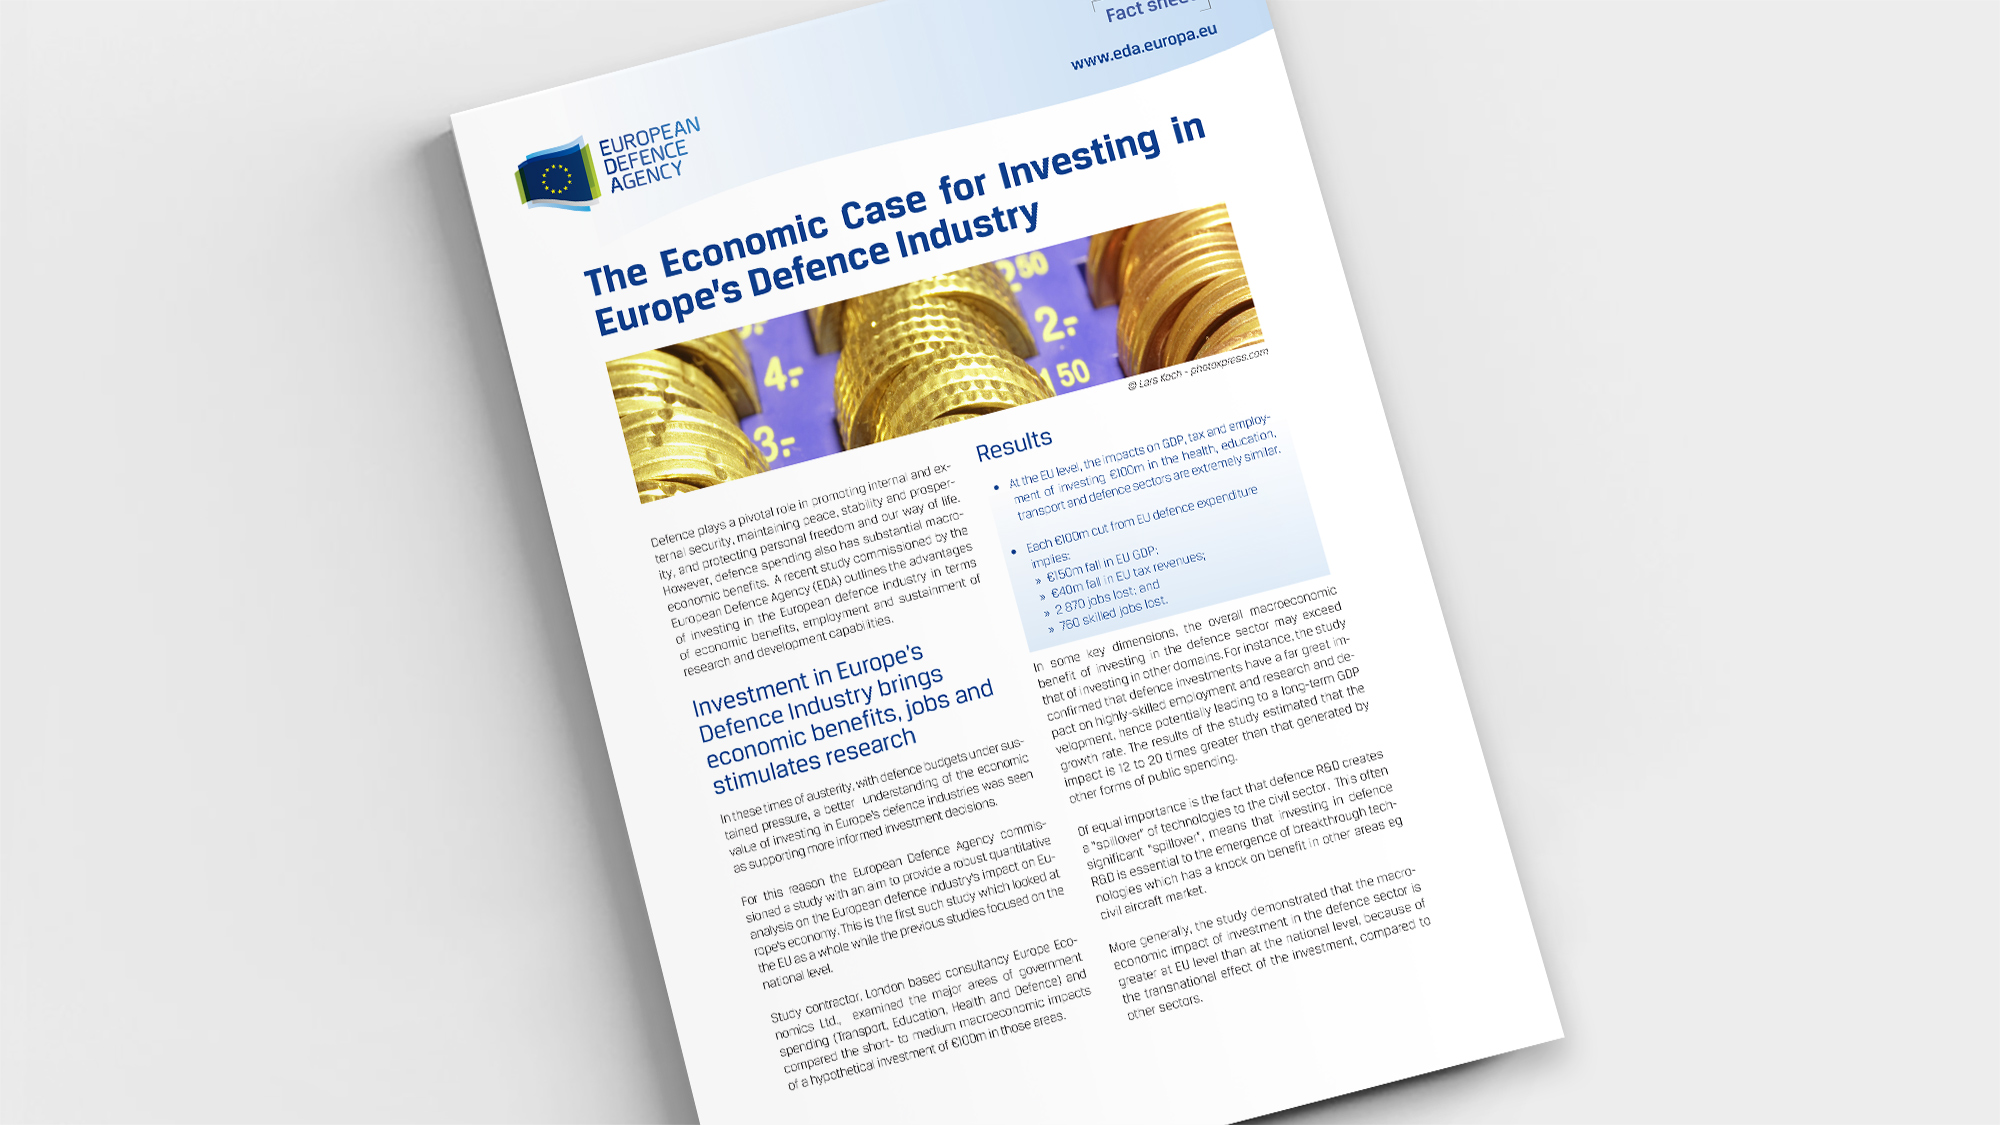 Factsheet The Economic Case for Investing in Europe’s Defence Industry